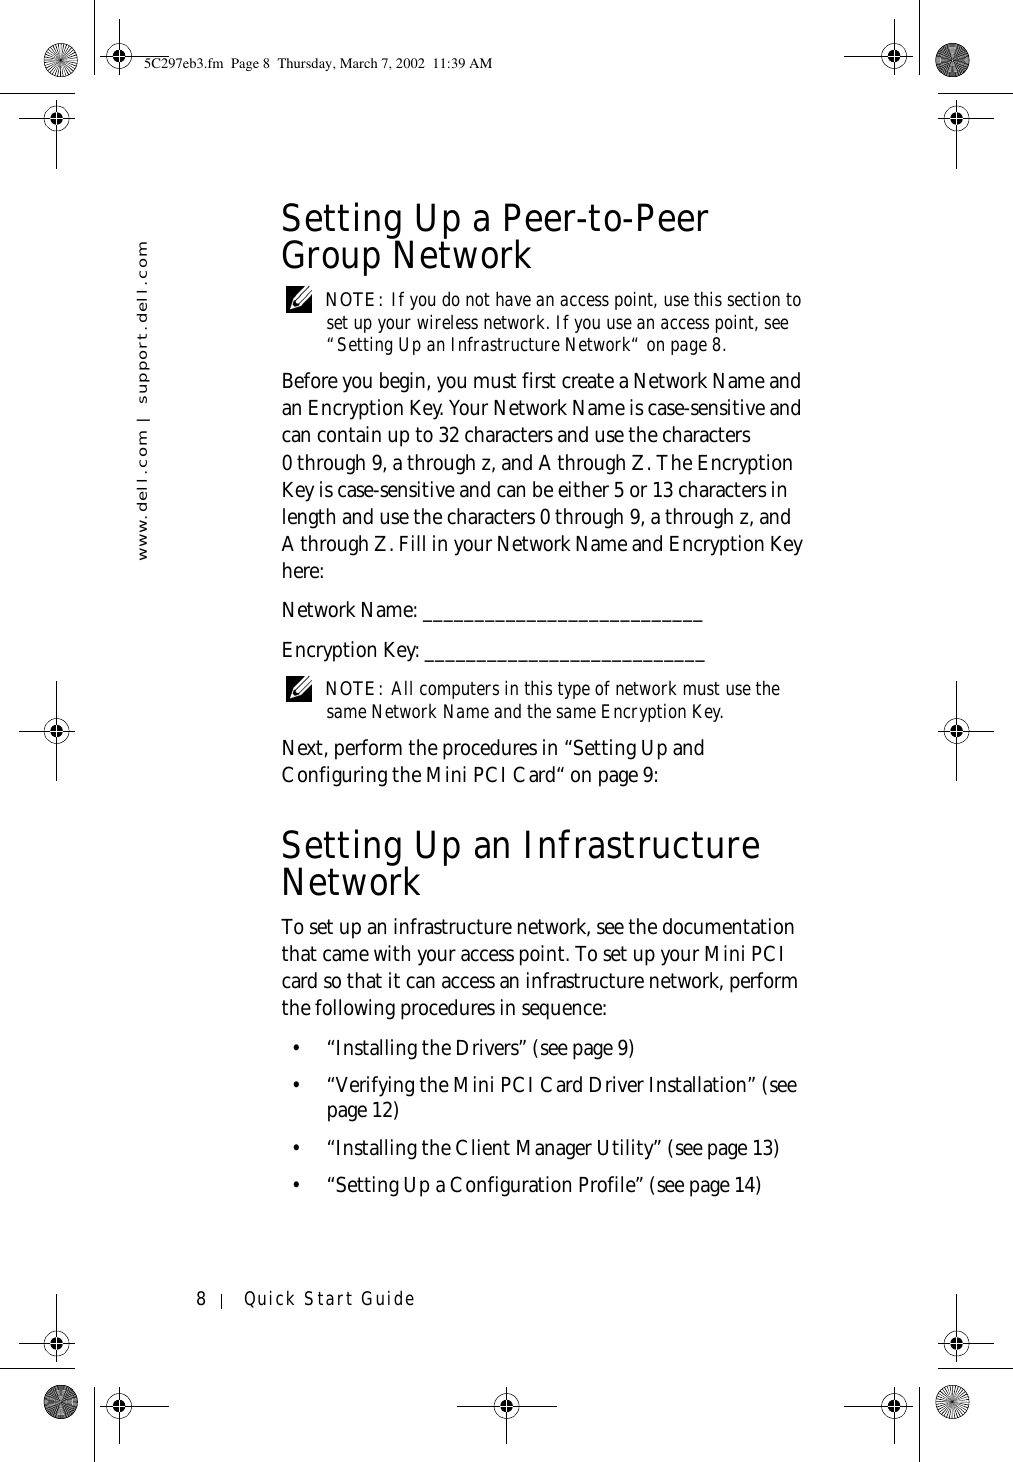 www.dell.com | support.dell.com8Quick Start GuideSetting Up a Peer-to-Peer Group Network NOTE: If you do not have an access point, use this section to set up your wireless network. If you use an access point, see “Setting Up an Infrastructure Network“ on page 8.Before you begin, you must first create a Network Name and an Encryption Key. Your Network Name is case-sensitive and can contain up to 32 characters and use the characters 0 through 9, a through z, and A through Z. The Encryption Key is case-sensitive and can be either 5 or 13 characters in length and use the characters 0 through 9, a through z, and A through Z. Fill in your Network Name and Encryption Key here:Network Name: ___________________________Encryption Key: ___________________________ NOTE: All computers in this type of network must use the same Network Name and the same Encryption Key.Next, perform the procedures in “Setting Up and Configuring the Mini PCI Card“ on page 9:Setting Up an Infrastructure NetworkTo set up an infrastructure network, see the documentation that came with your access point. To set up your Mini PCI card so that it can access an infrastructure network, perform the following procedures in sequence:• “Installing the Drivers” (see page 9)• “Verifying the Mini PCI Card Driver Installation” (see page 12)• “Installing the Client Manager Utility” (see page 13)• “Setting Up a Configuration Profile” (see page 14)5C297eb3.fm  Page 8  Thursday, March 7, 2002  11:39 AM